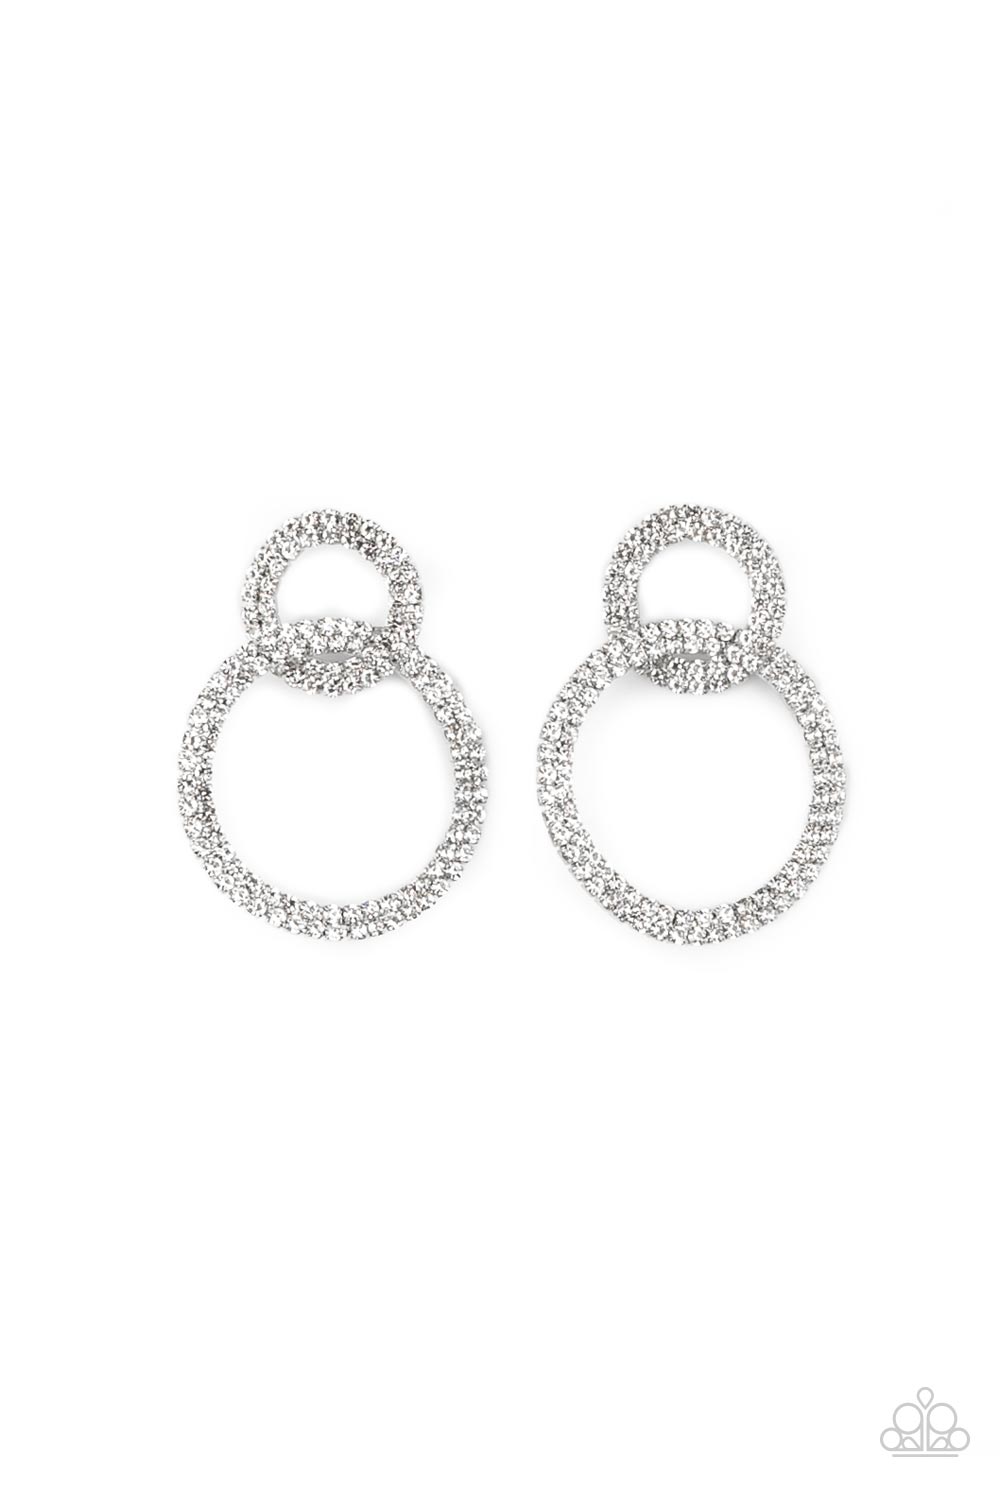 Intensely Icy - White Sparkly Earrings - Paparazzi Accessories - Rows of sparkly white rhinestones encircle into two interconnected hoops, creating a jaw-dropping bling earrings.  Bejeweled Accessories By Kristie - Trendy fashion jewelry for everyone -